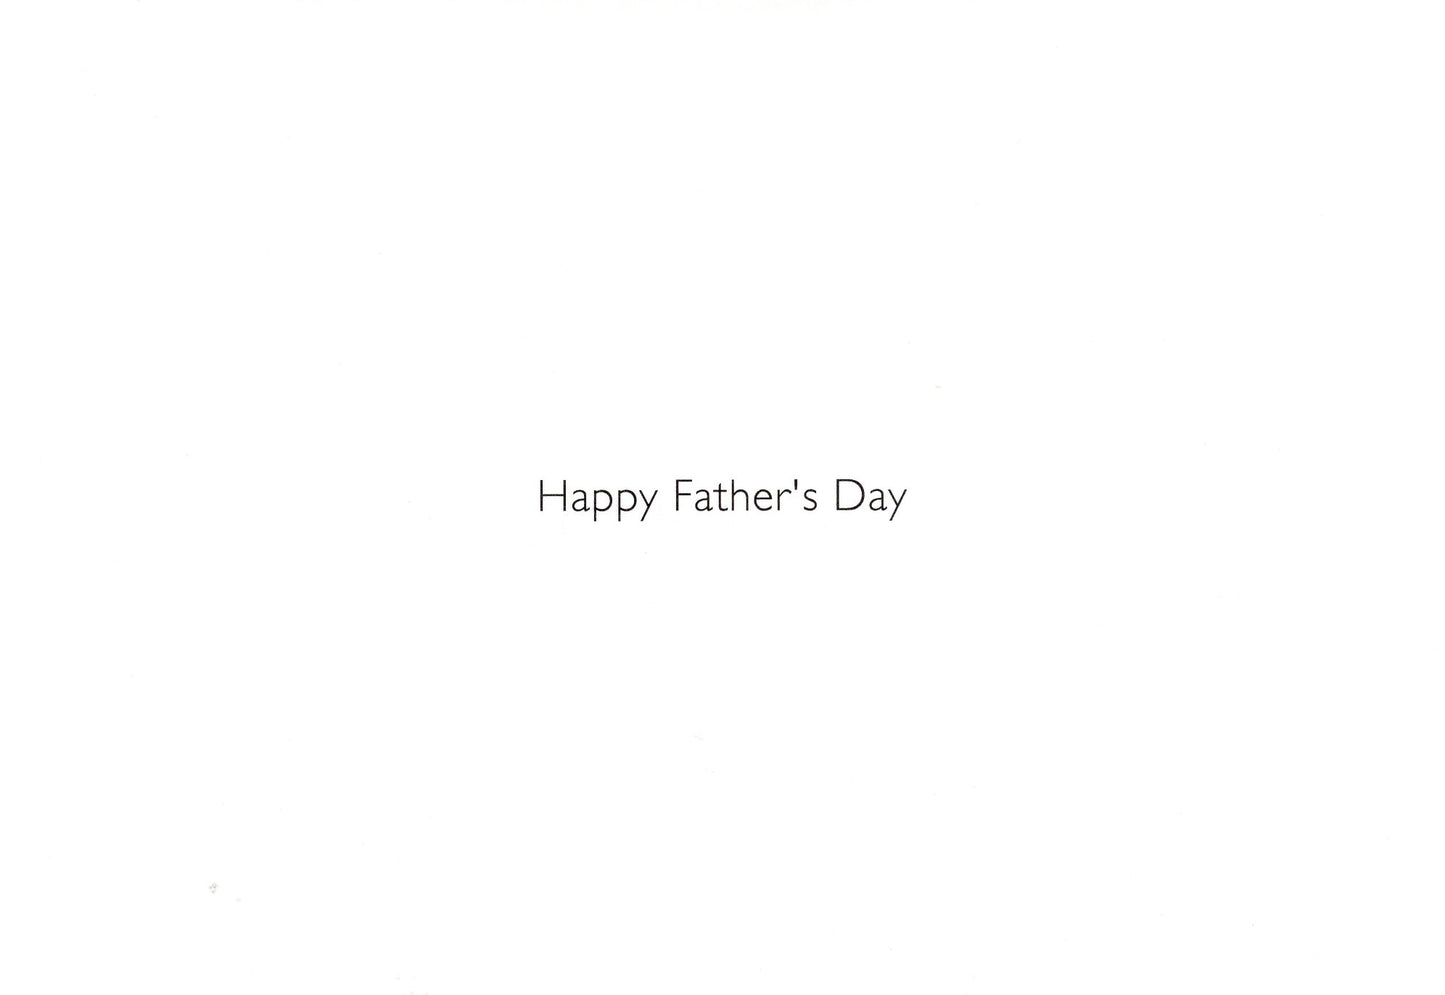 Dad Shopping Funny Berger & Wyse Father's Day Greeting Card